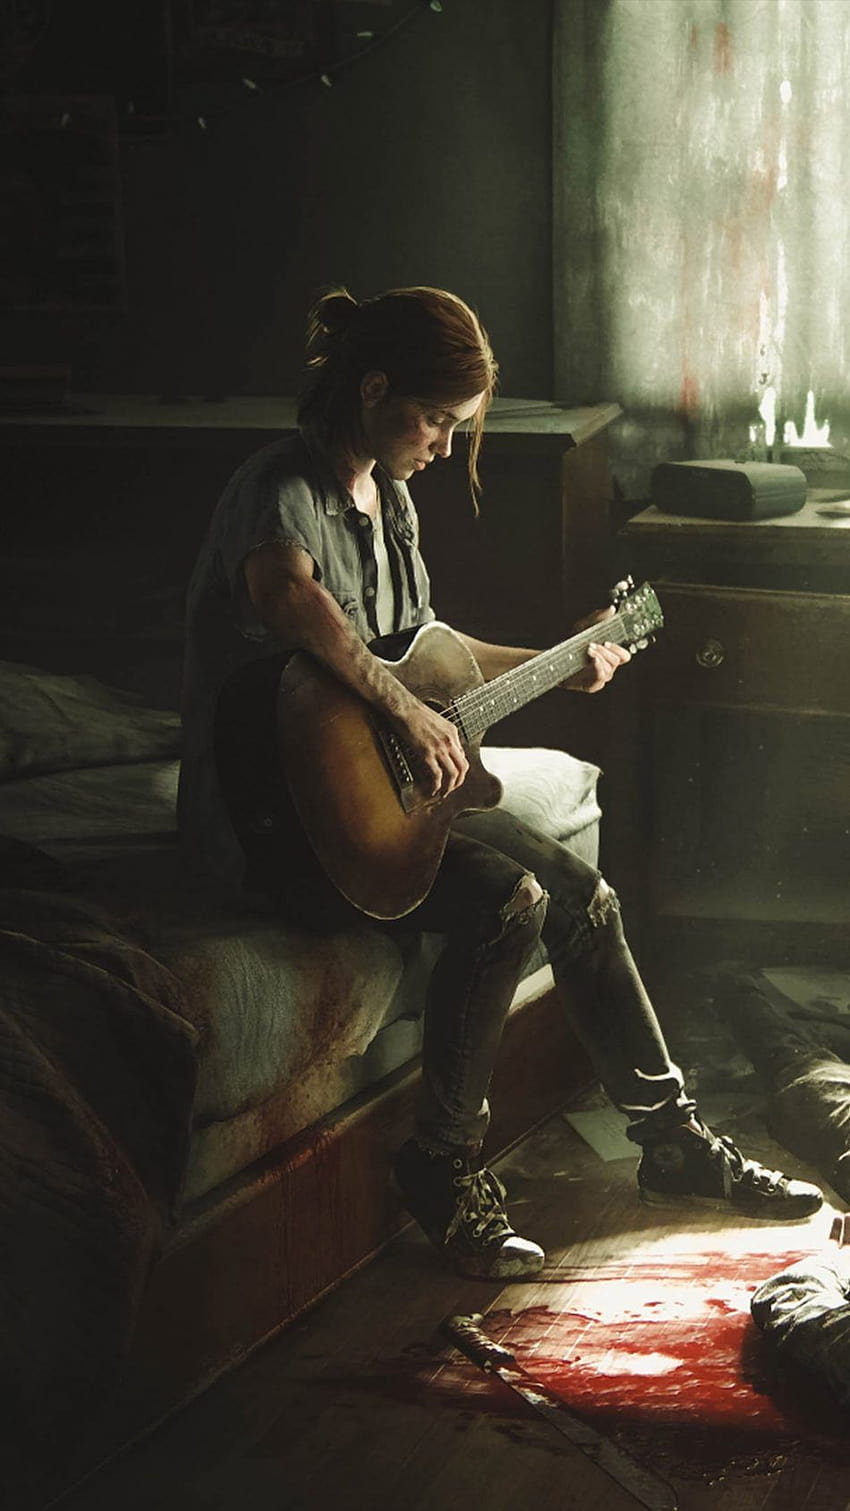 4 Last Of Us 2 iPhone, the last of us 2 iphone HD phone wallpaper